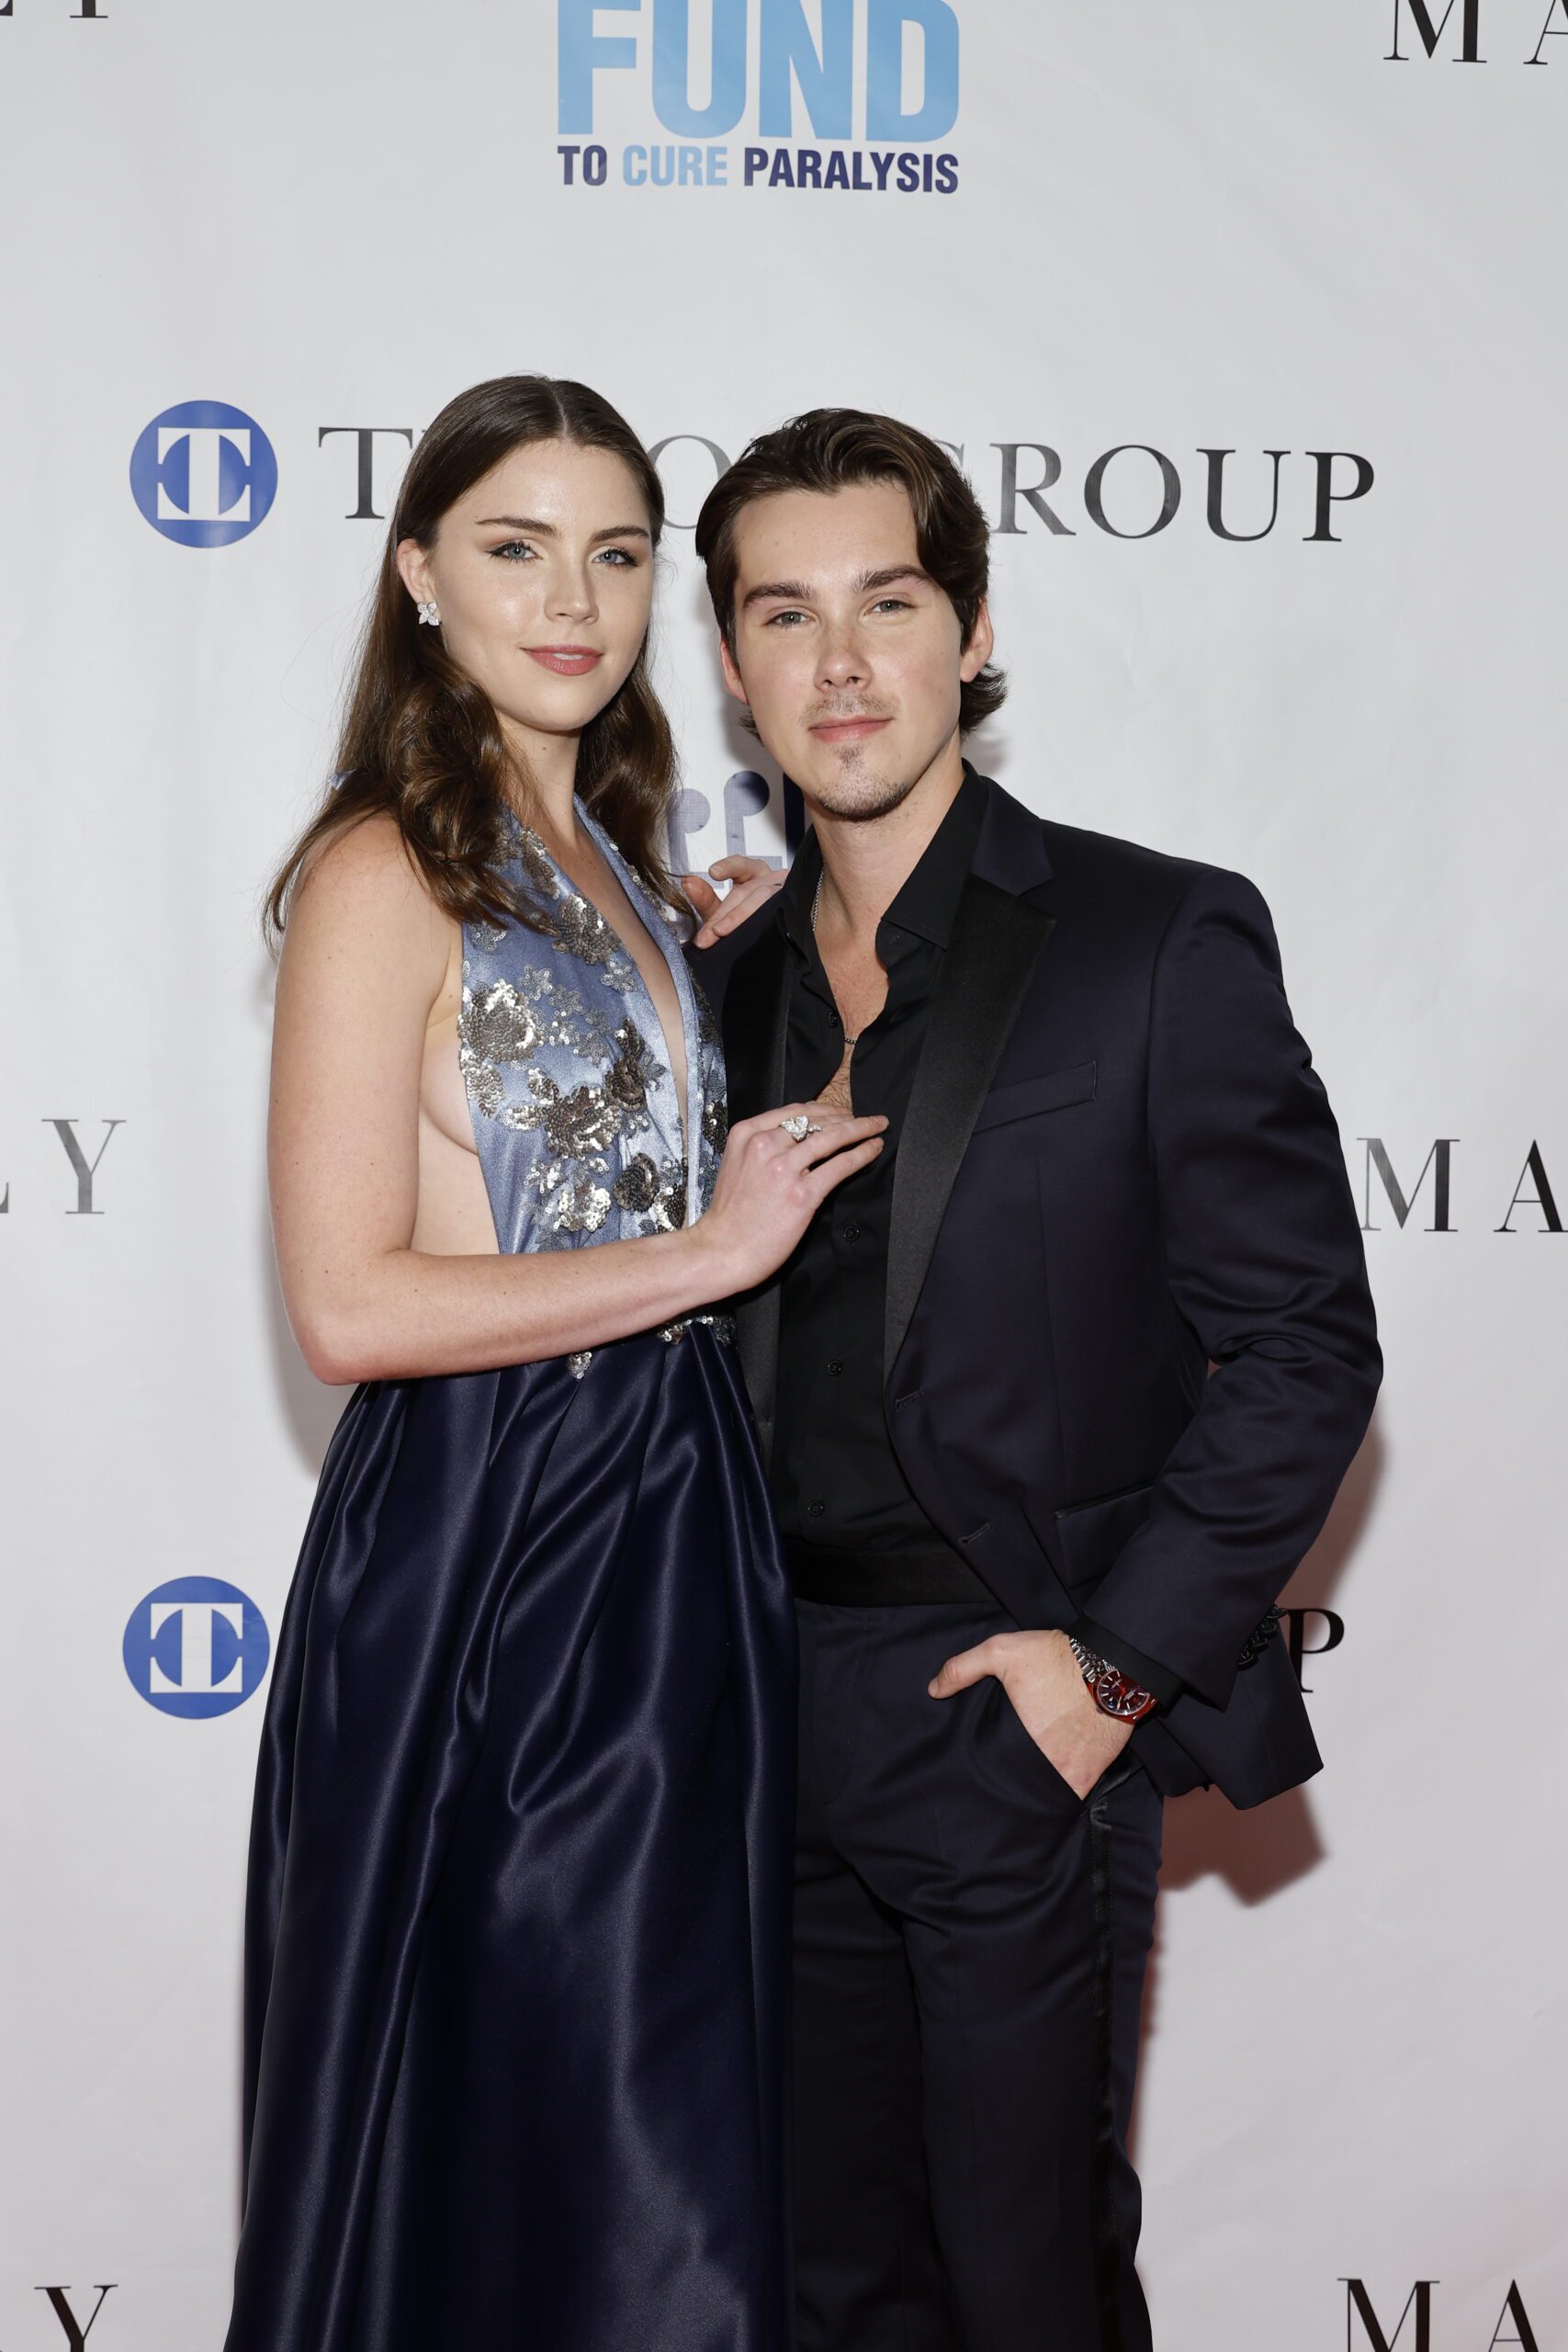 Carolynn Rowland Shada and Jeremy Shada (Photo by Mike Coppola/Getty Images for The Buoniconti Fund to Cure Paralysis)